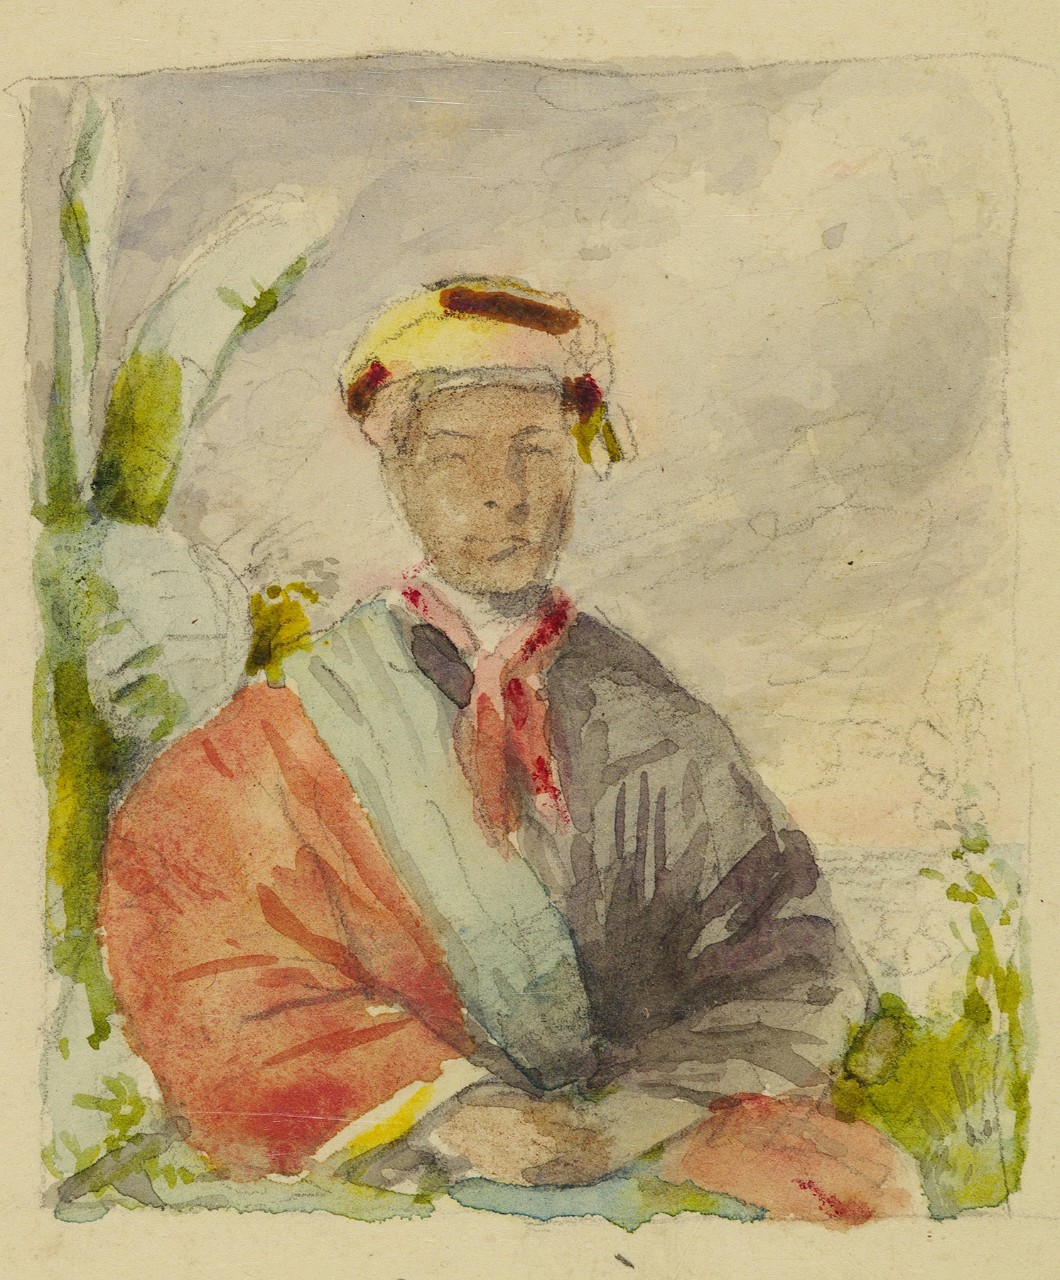 A portrait of a seated man in formal dress